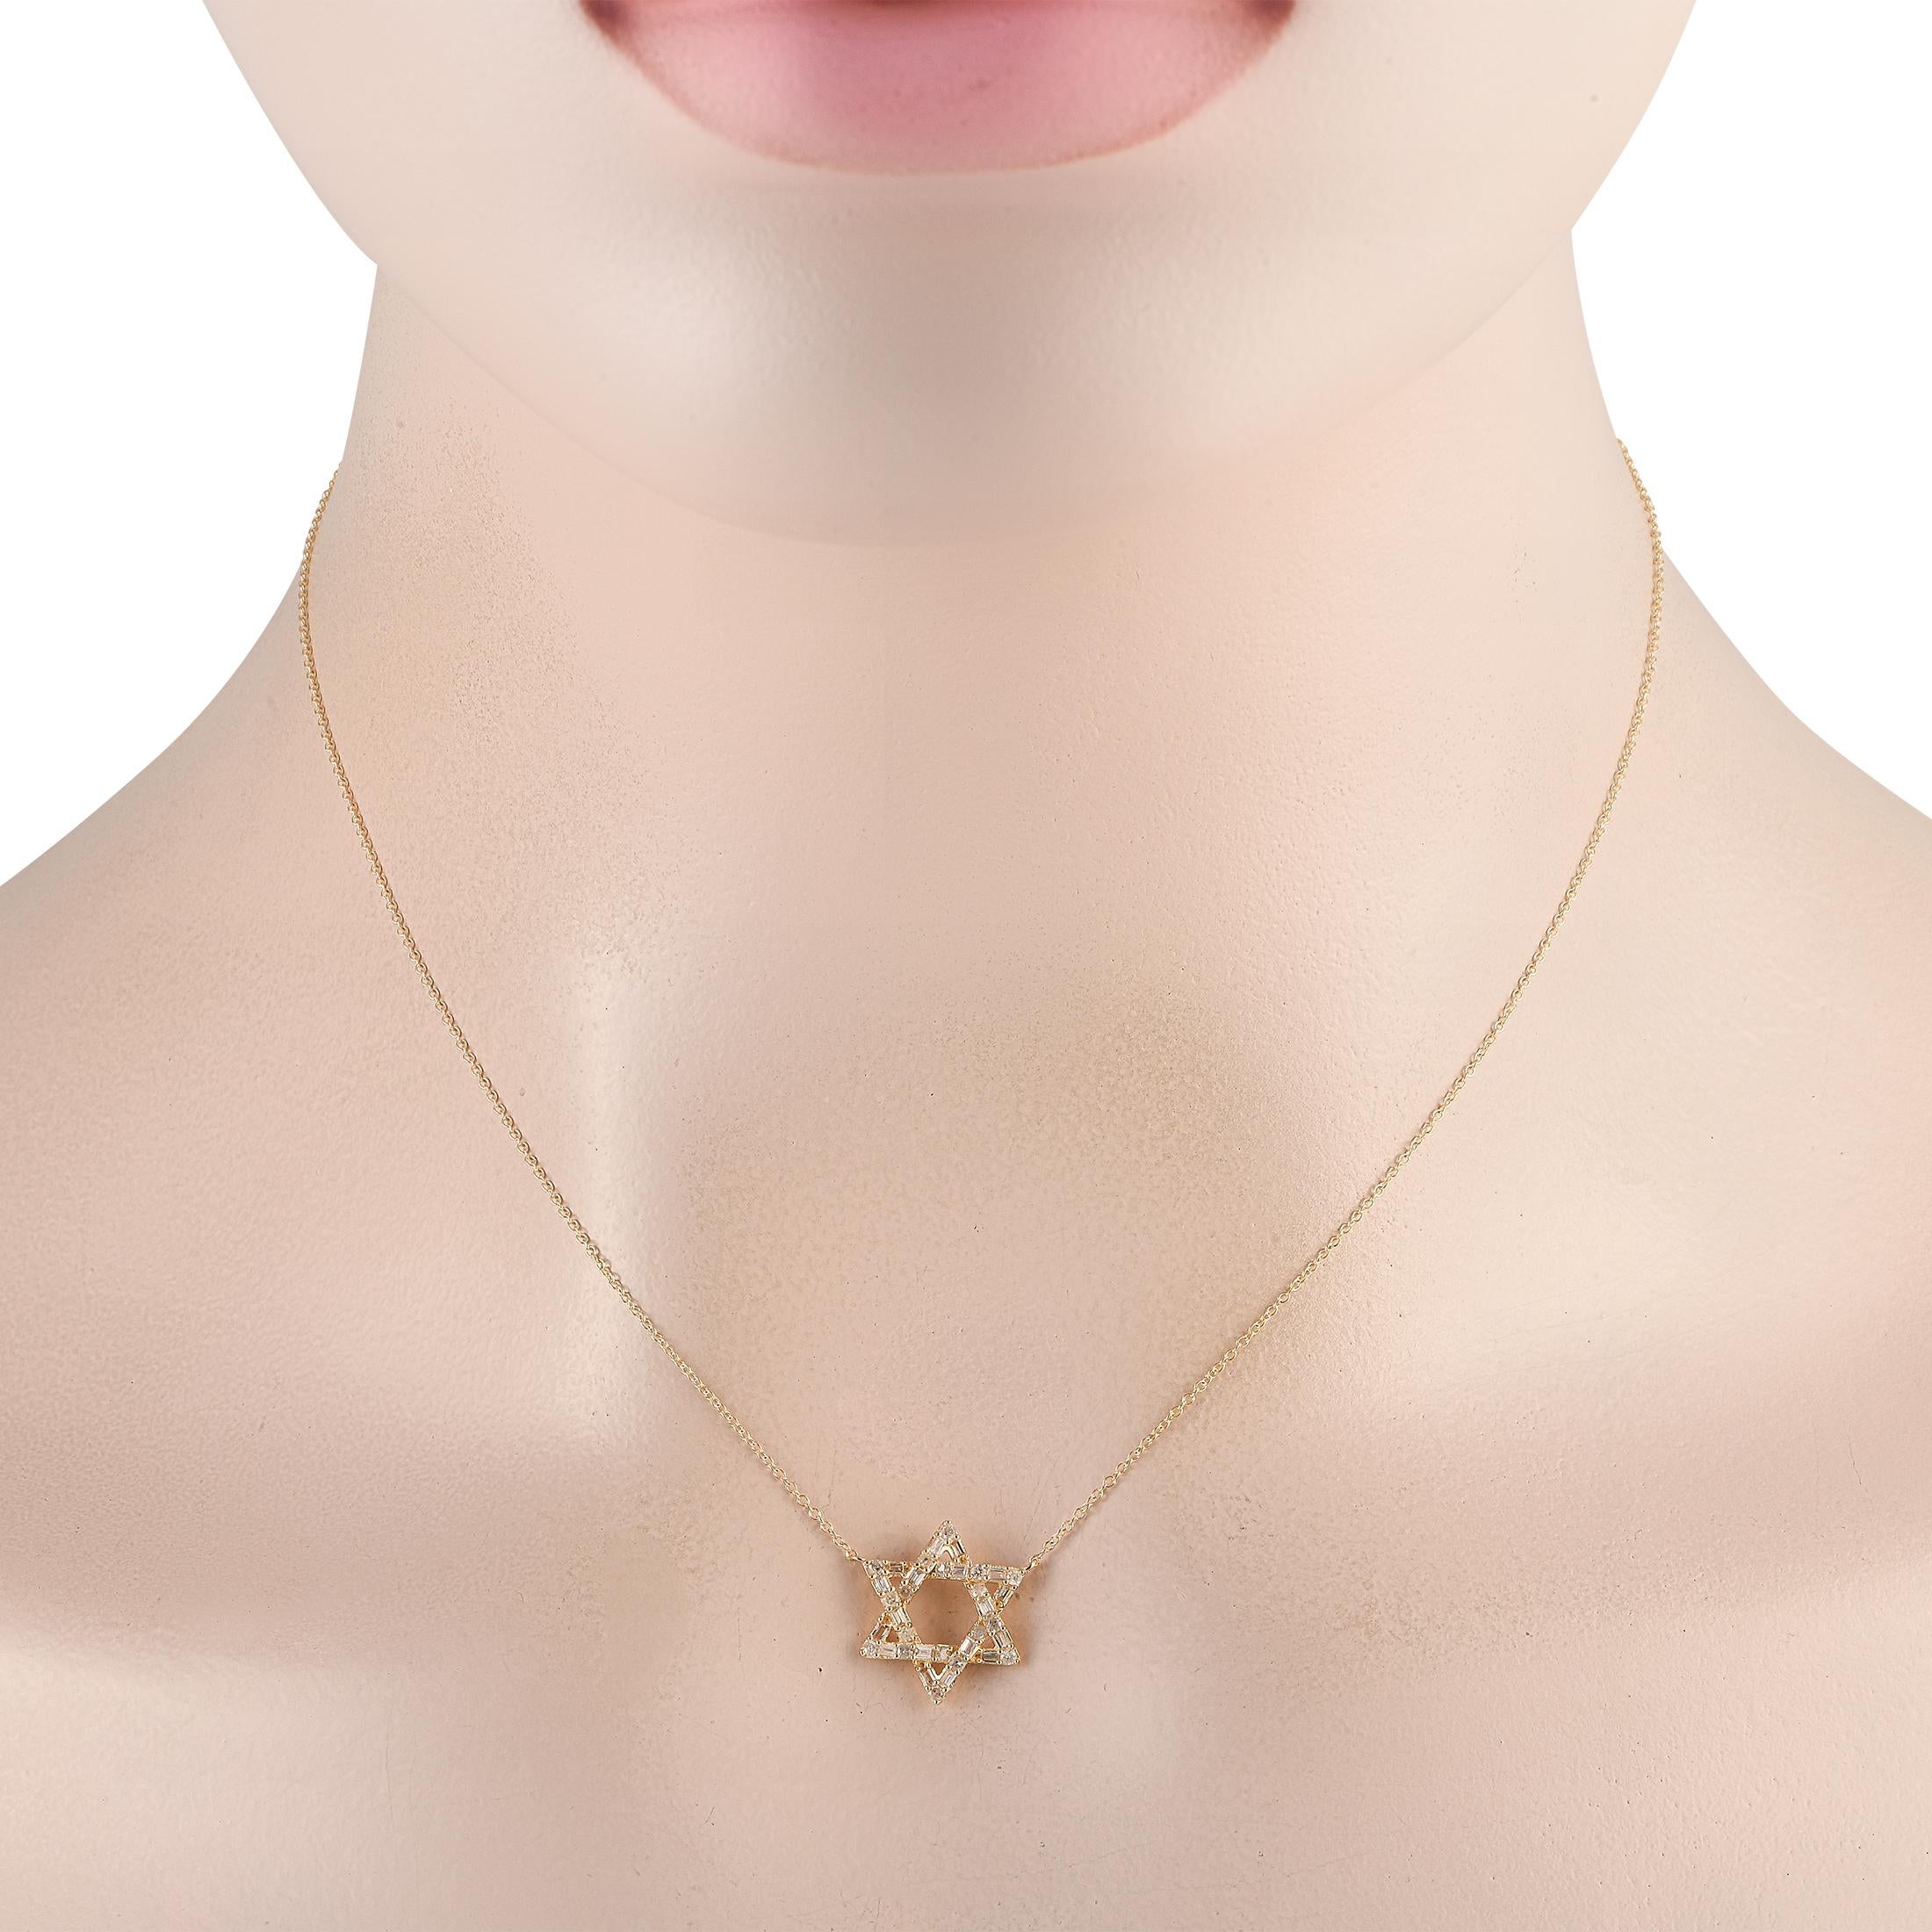 With incredible versatility, this diamond necklace will be your favorite daily companion. This piece is crafted from 14K yellow gold, with a pendant measuring half an inch and a chain measuring 16 inches long. The pendant is designed as a